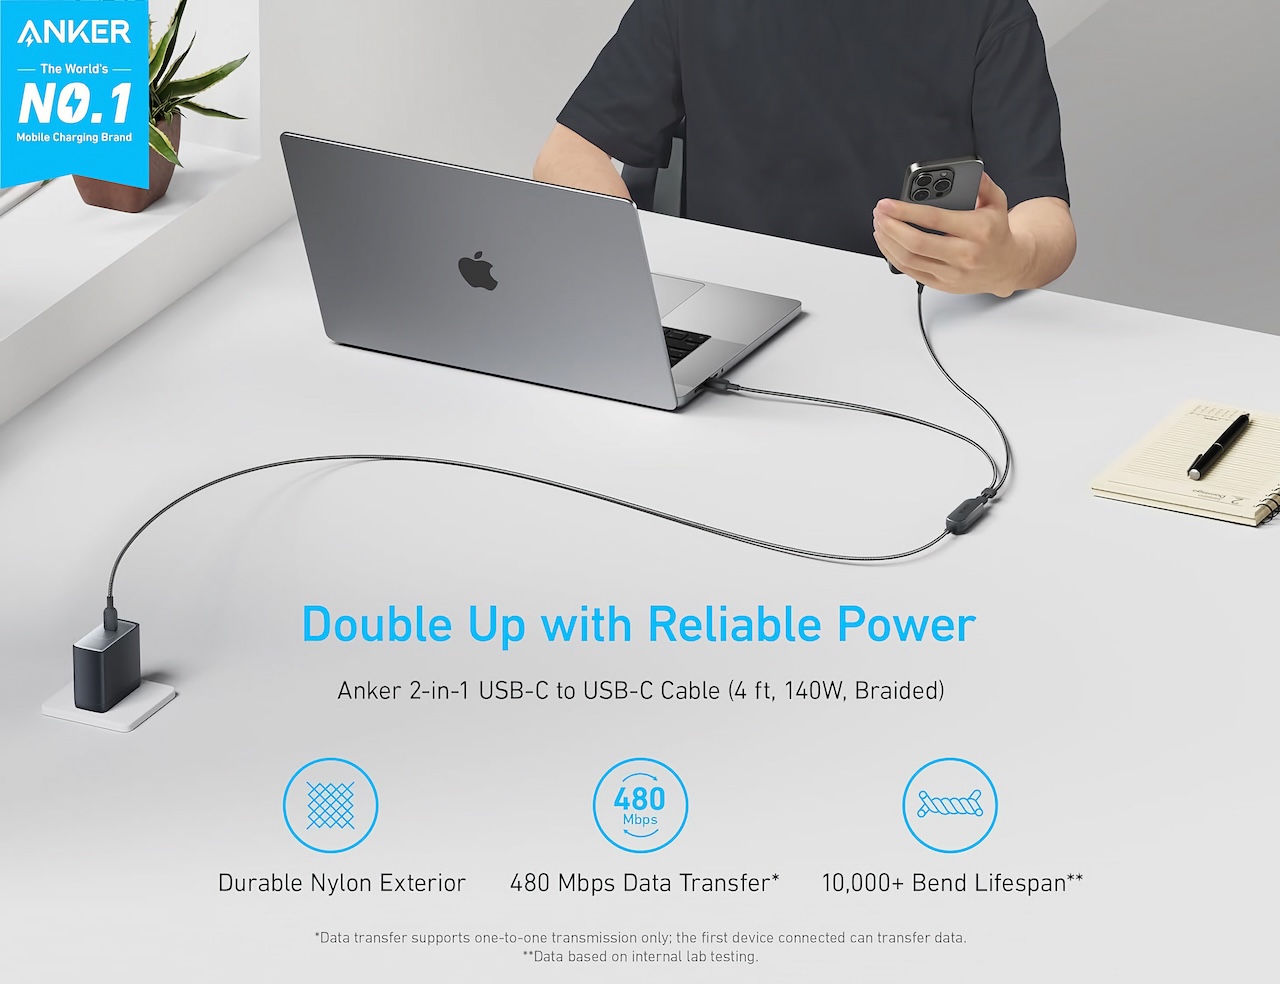 Anker 2-in-1 USB-C to USB-C Cable (4 ft, 140W, Braided)